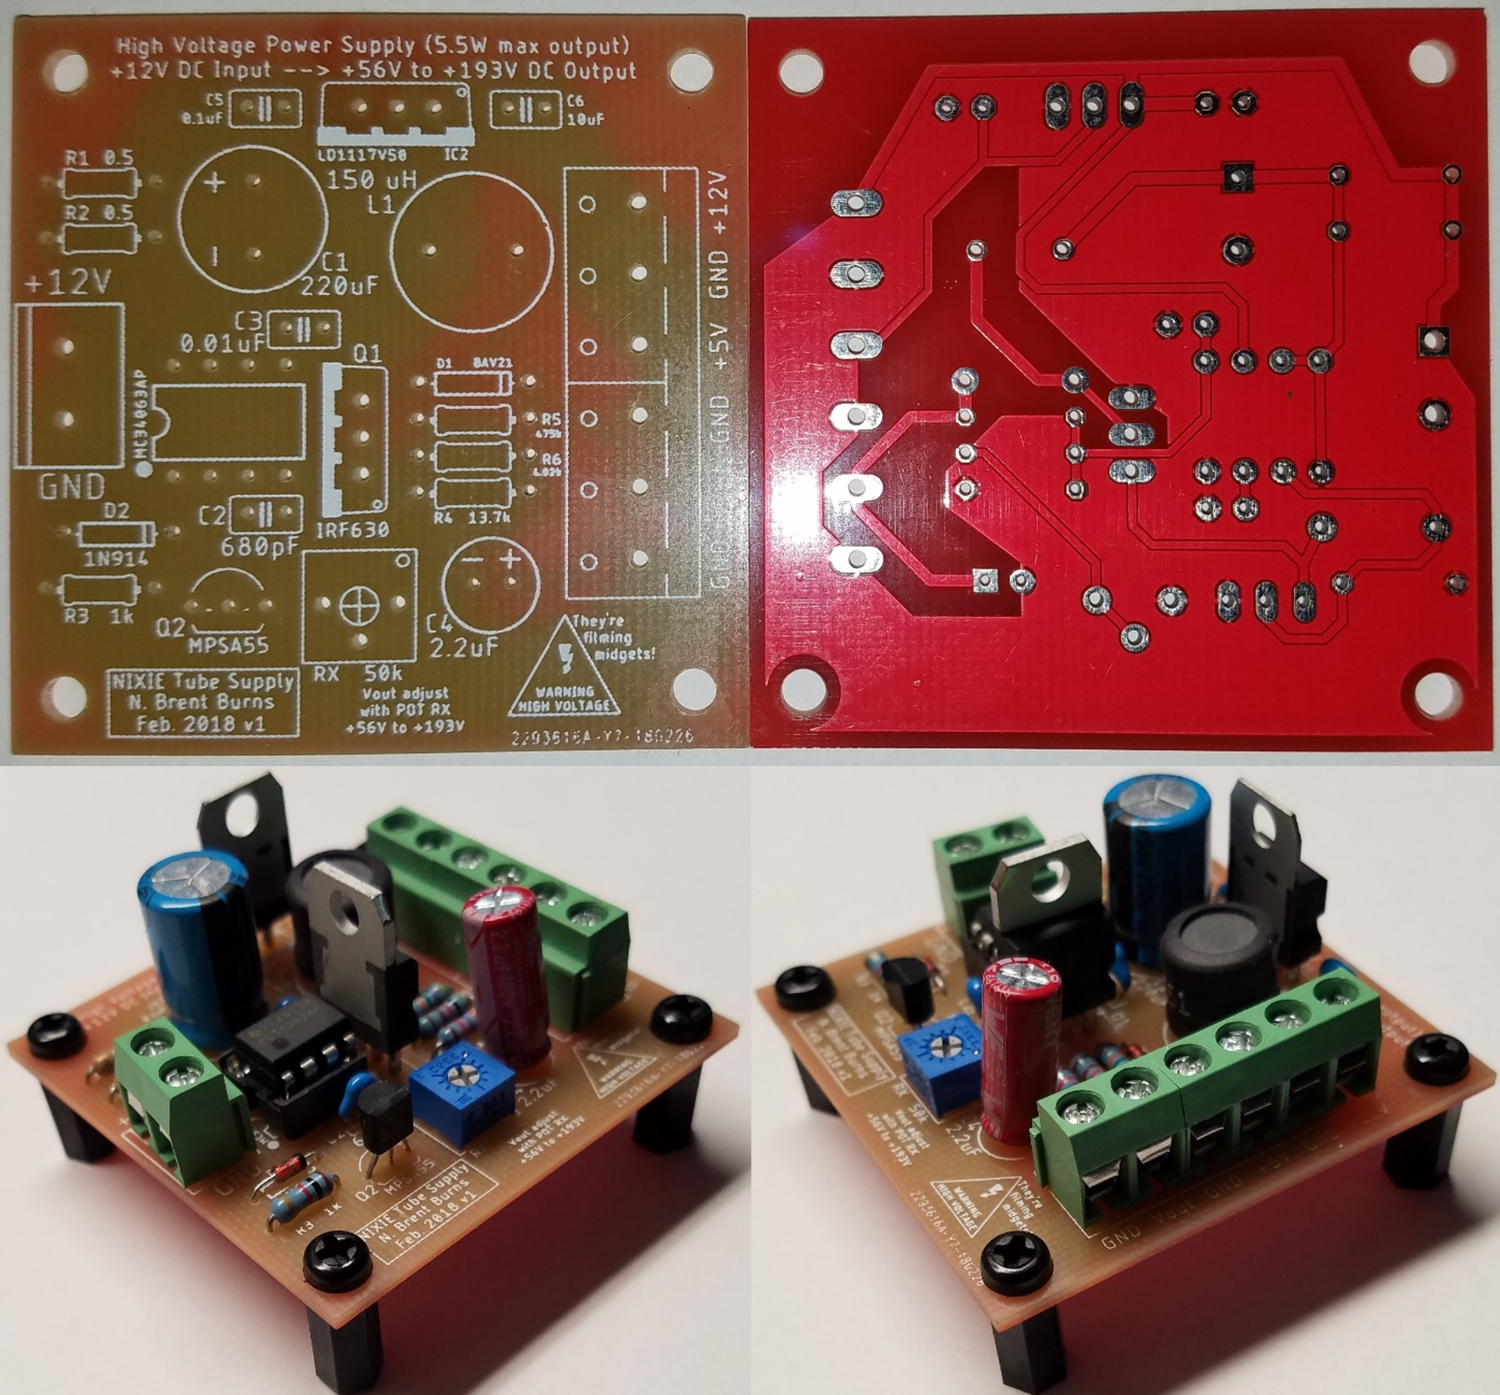 High Voltage Power Supply PCB for Nixie Tubes